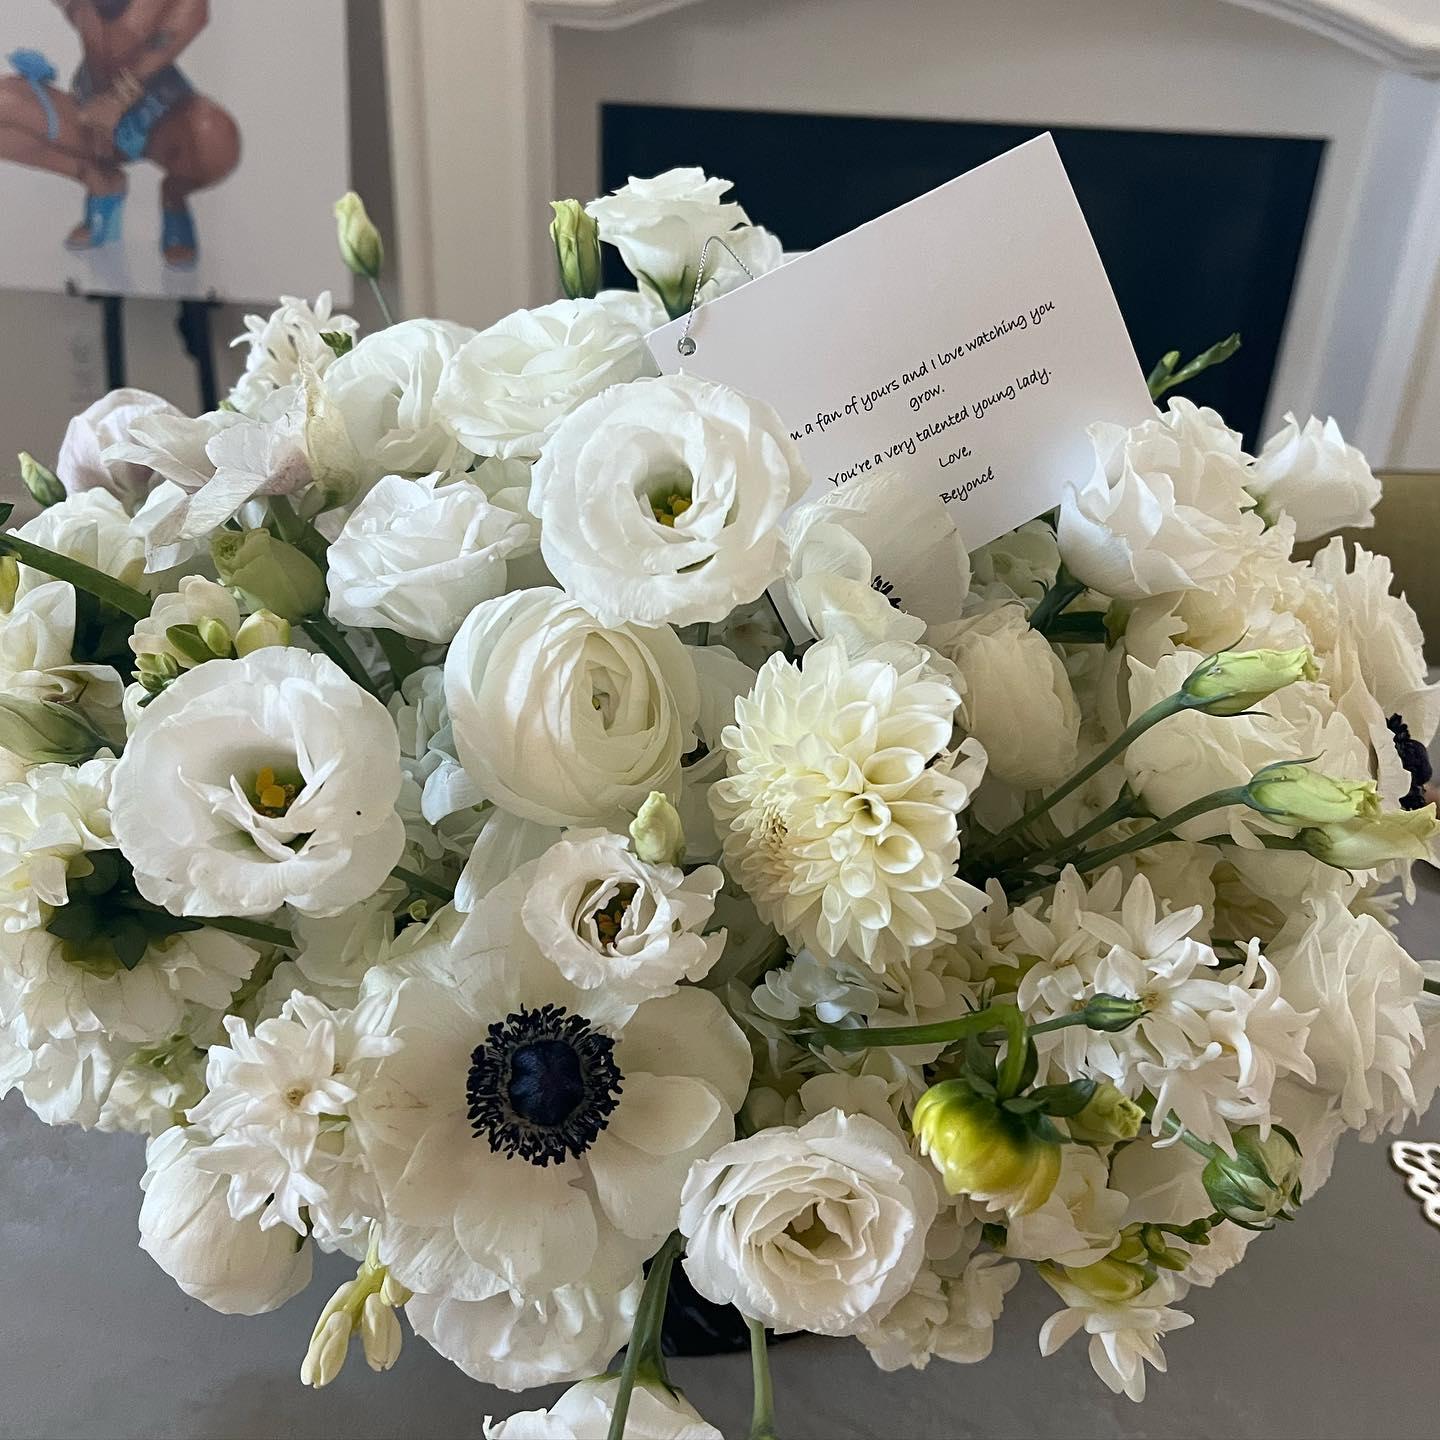 Coi Leray gifted flowers from Beyonce amid VMAs exclusion